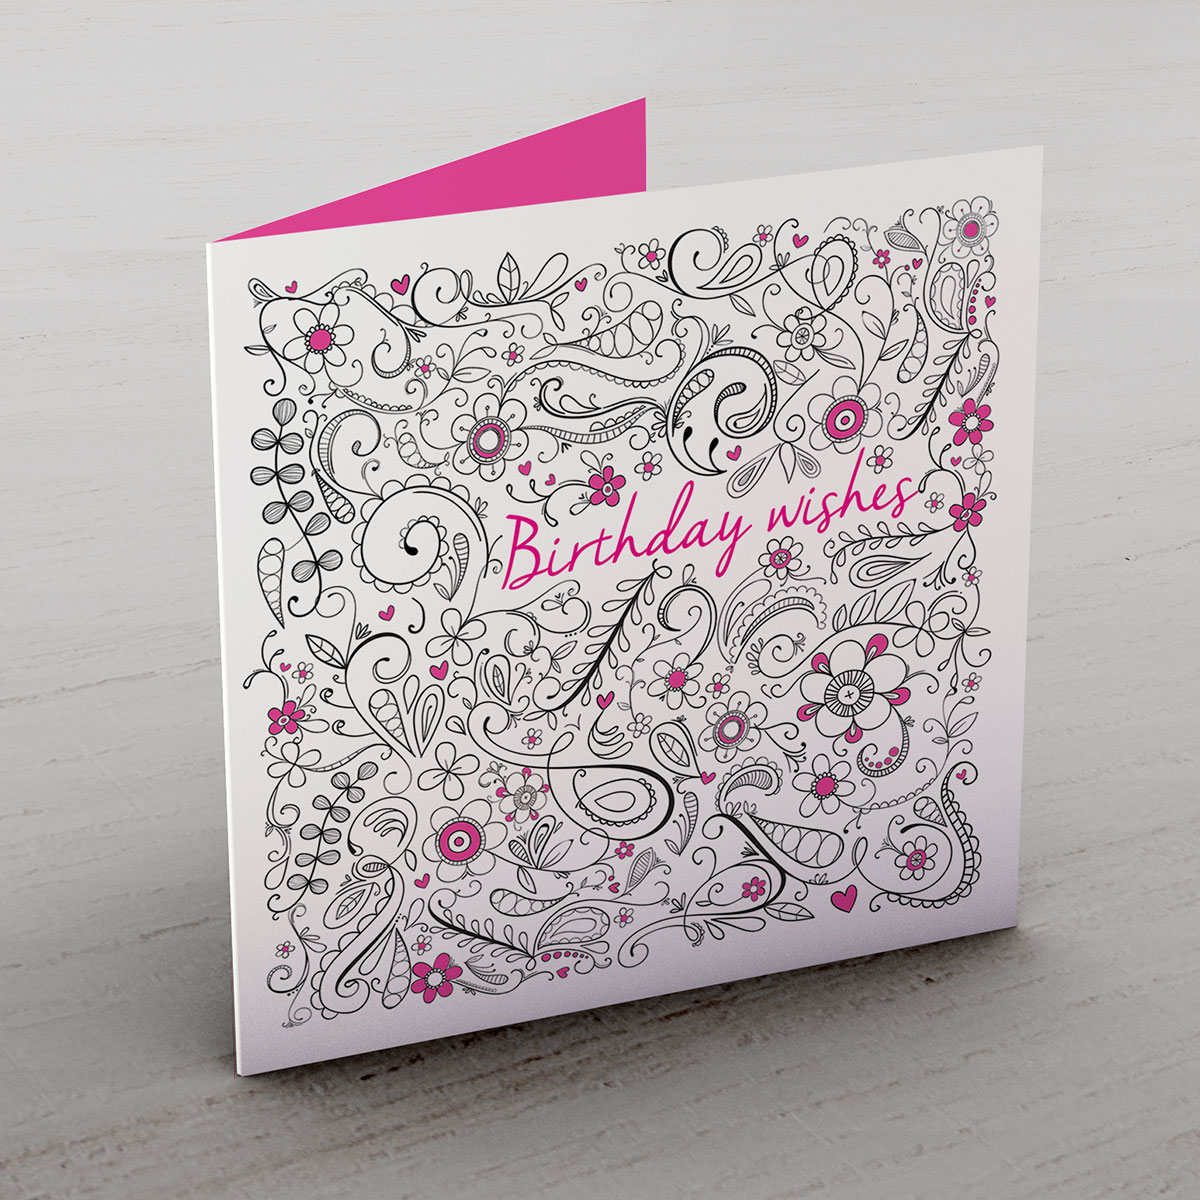 Personalised Birthday Card - Pink & White Floral Pattern